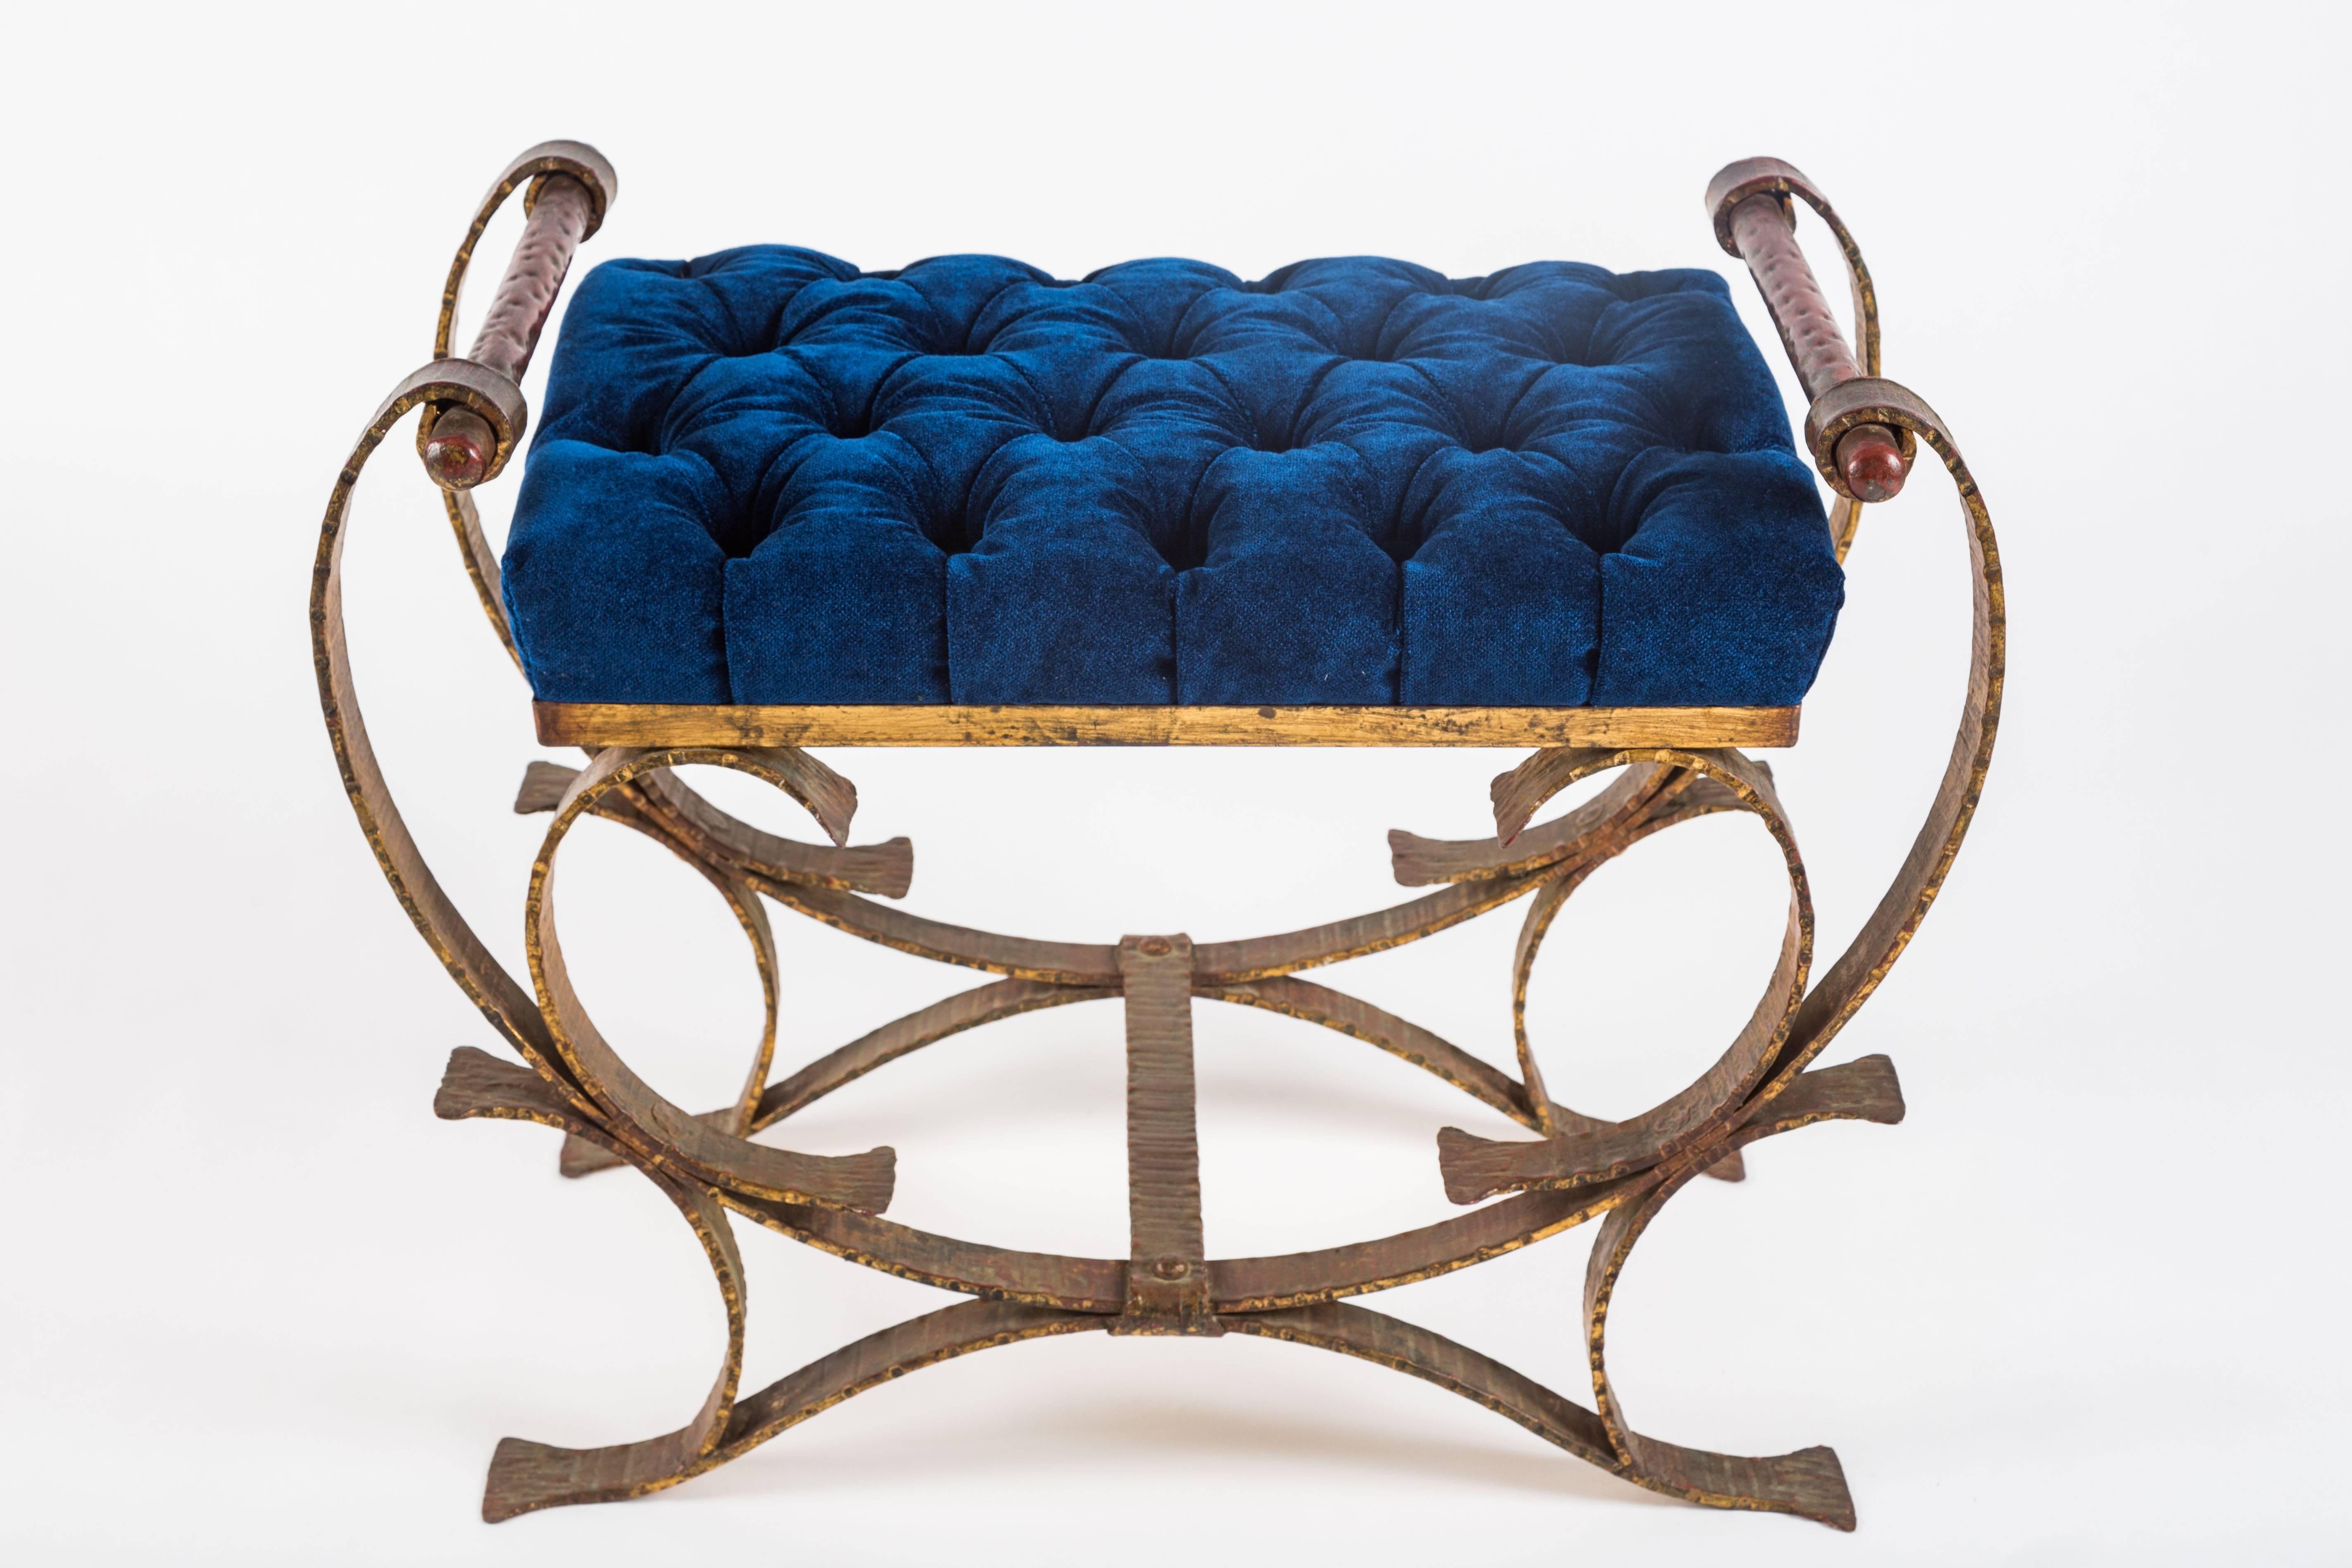 Rococo Pair of Striking Velvet Tufted Iron Curule Benches by Borghese